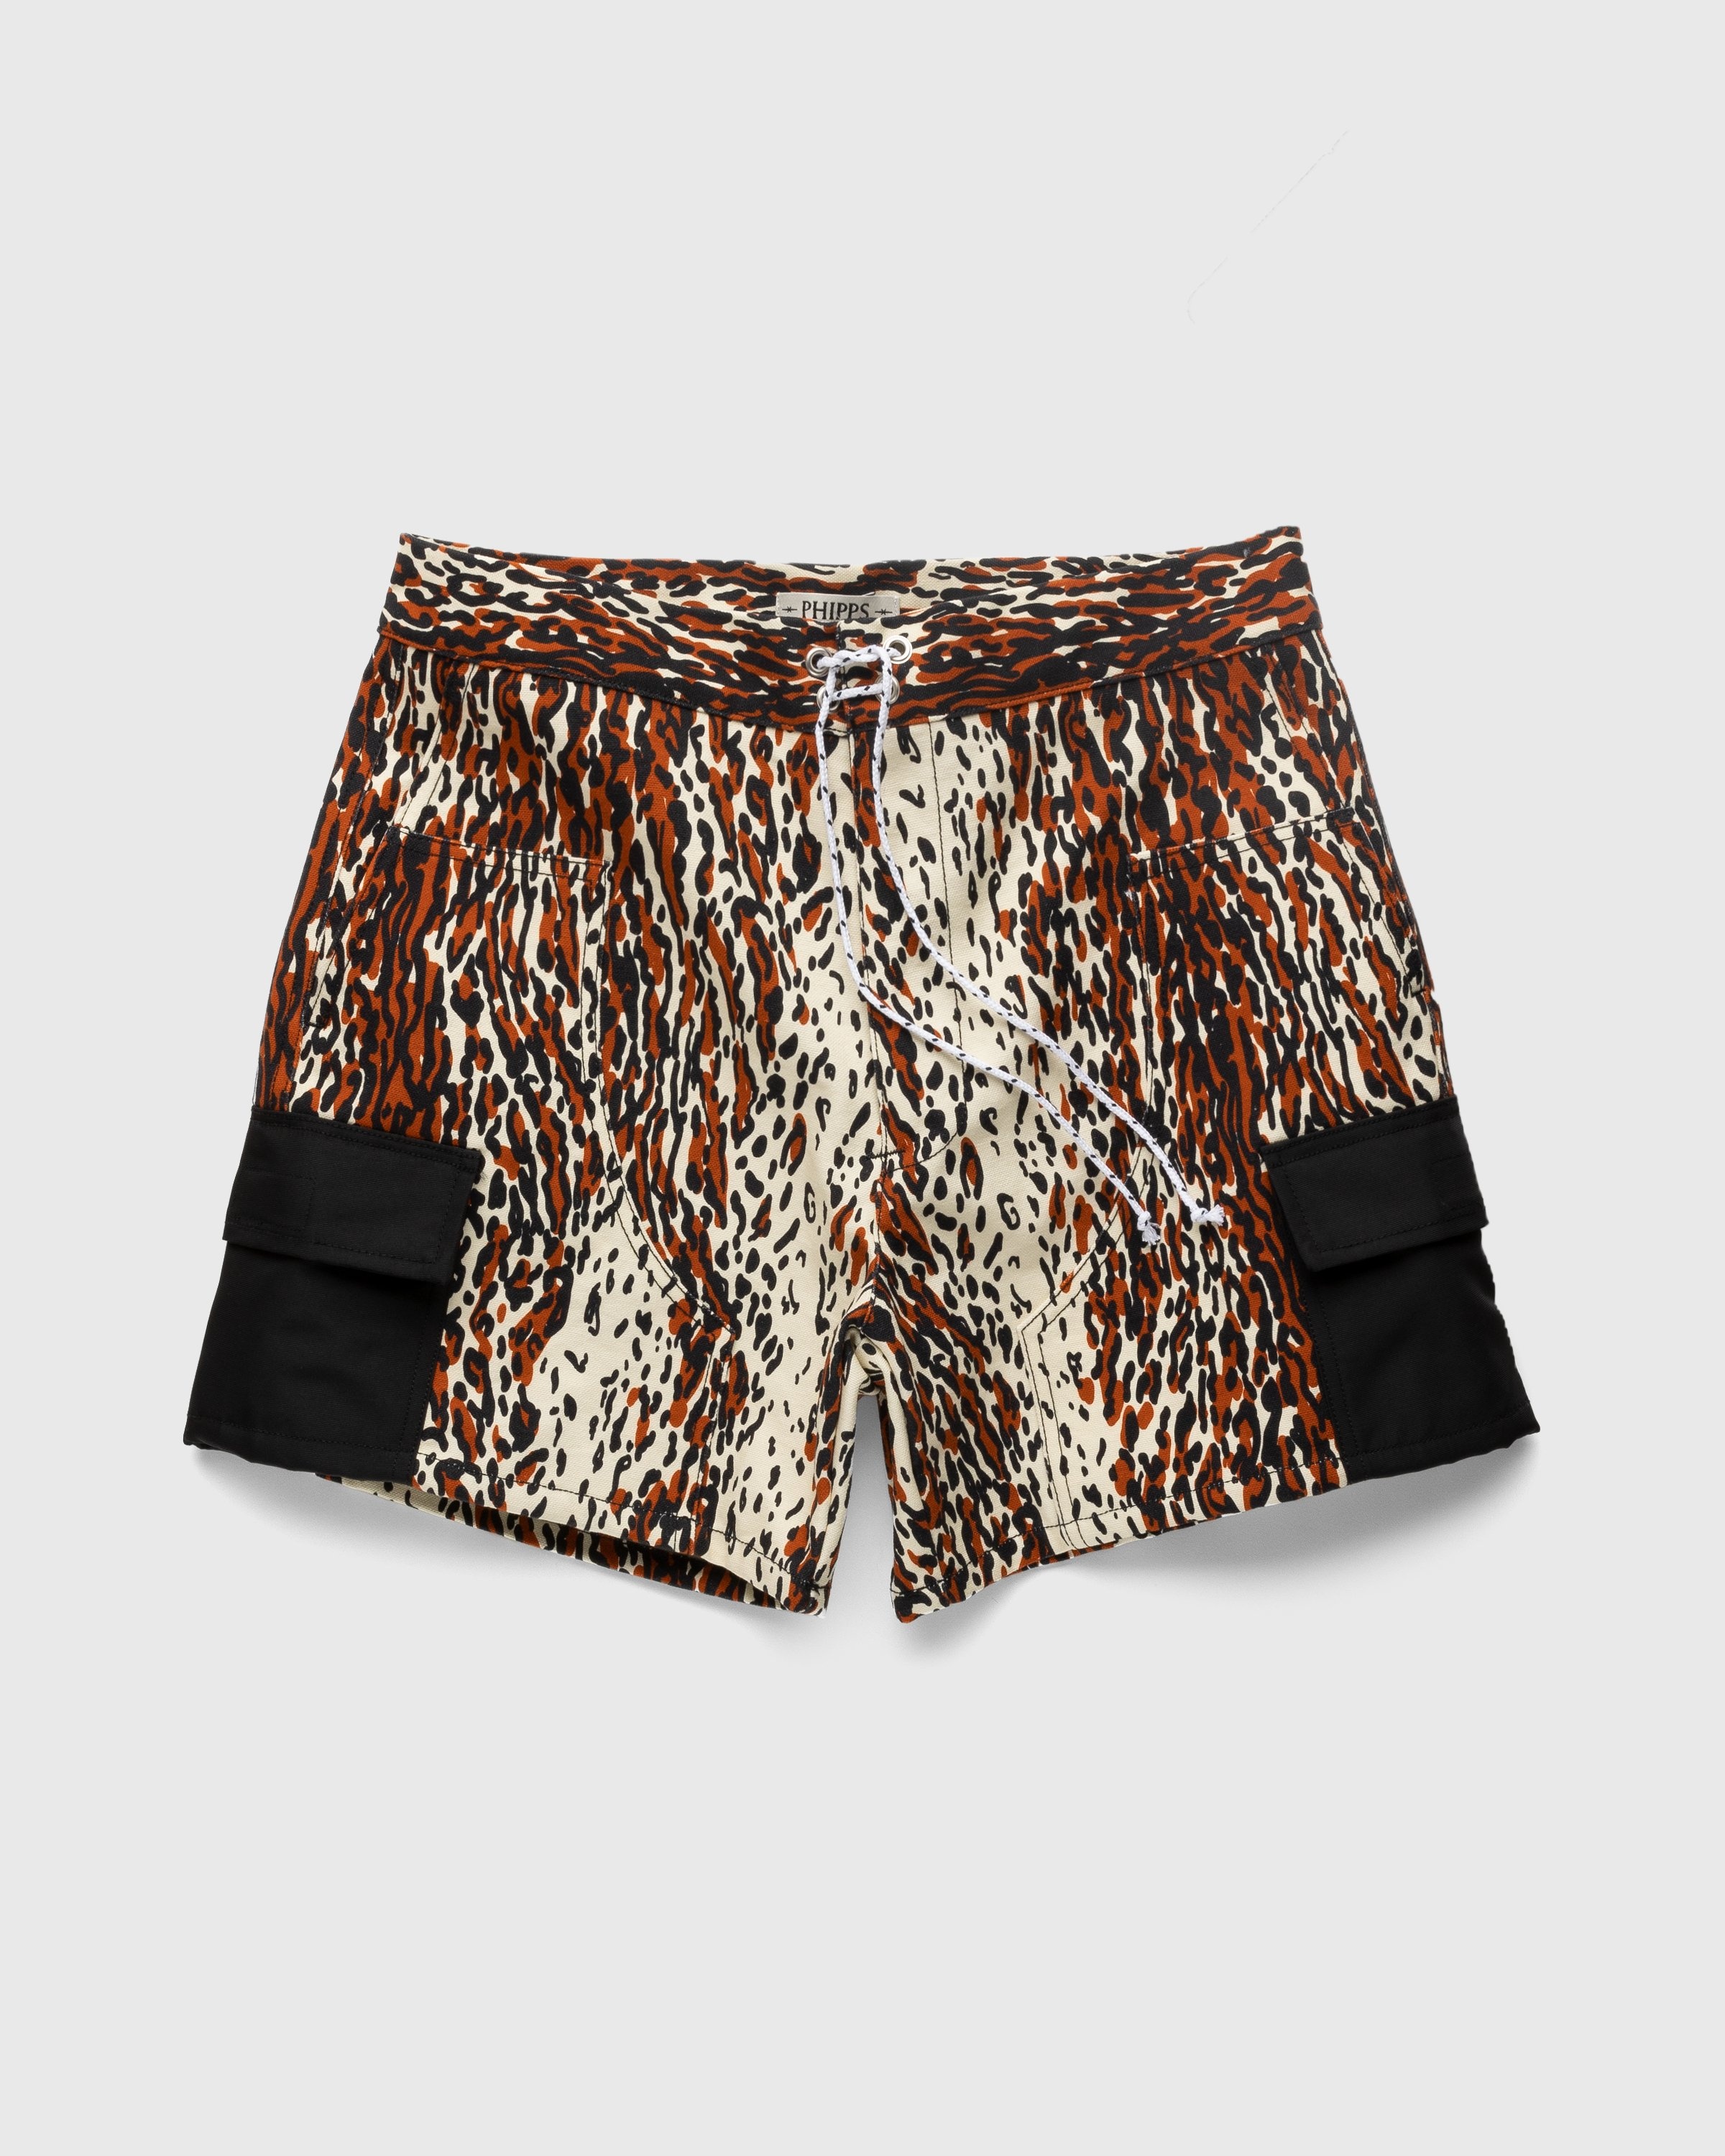 Phipps – Action Shorts Printed Canvas Leopard - Shorts - Brown - Image 1